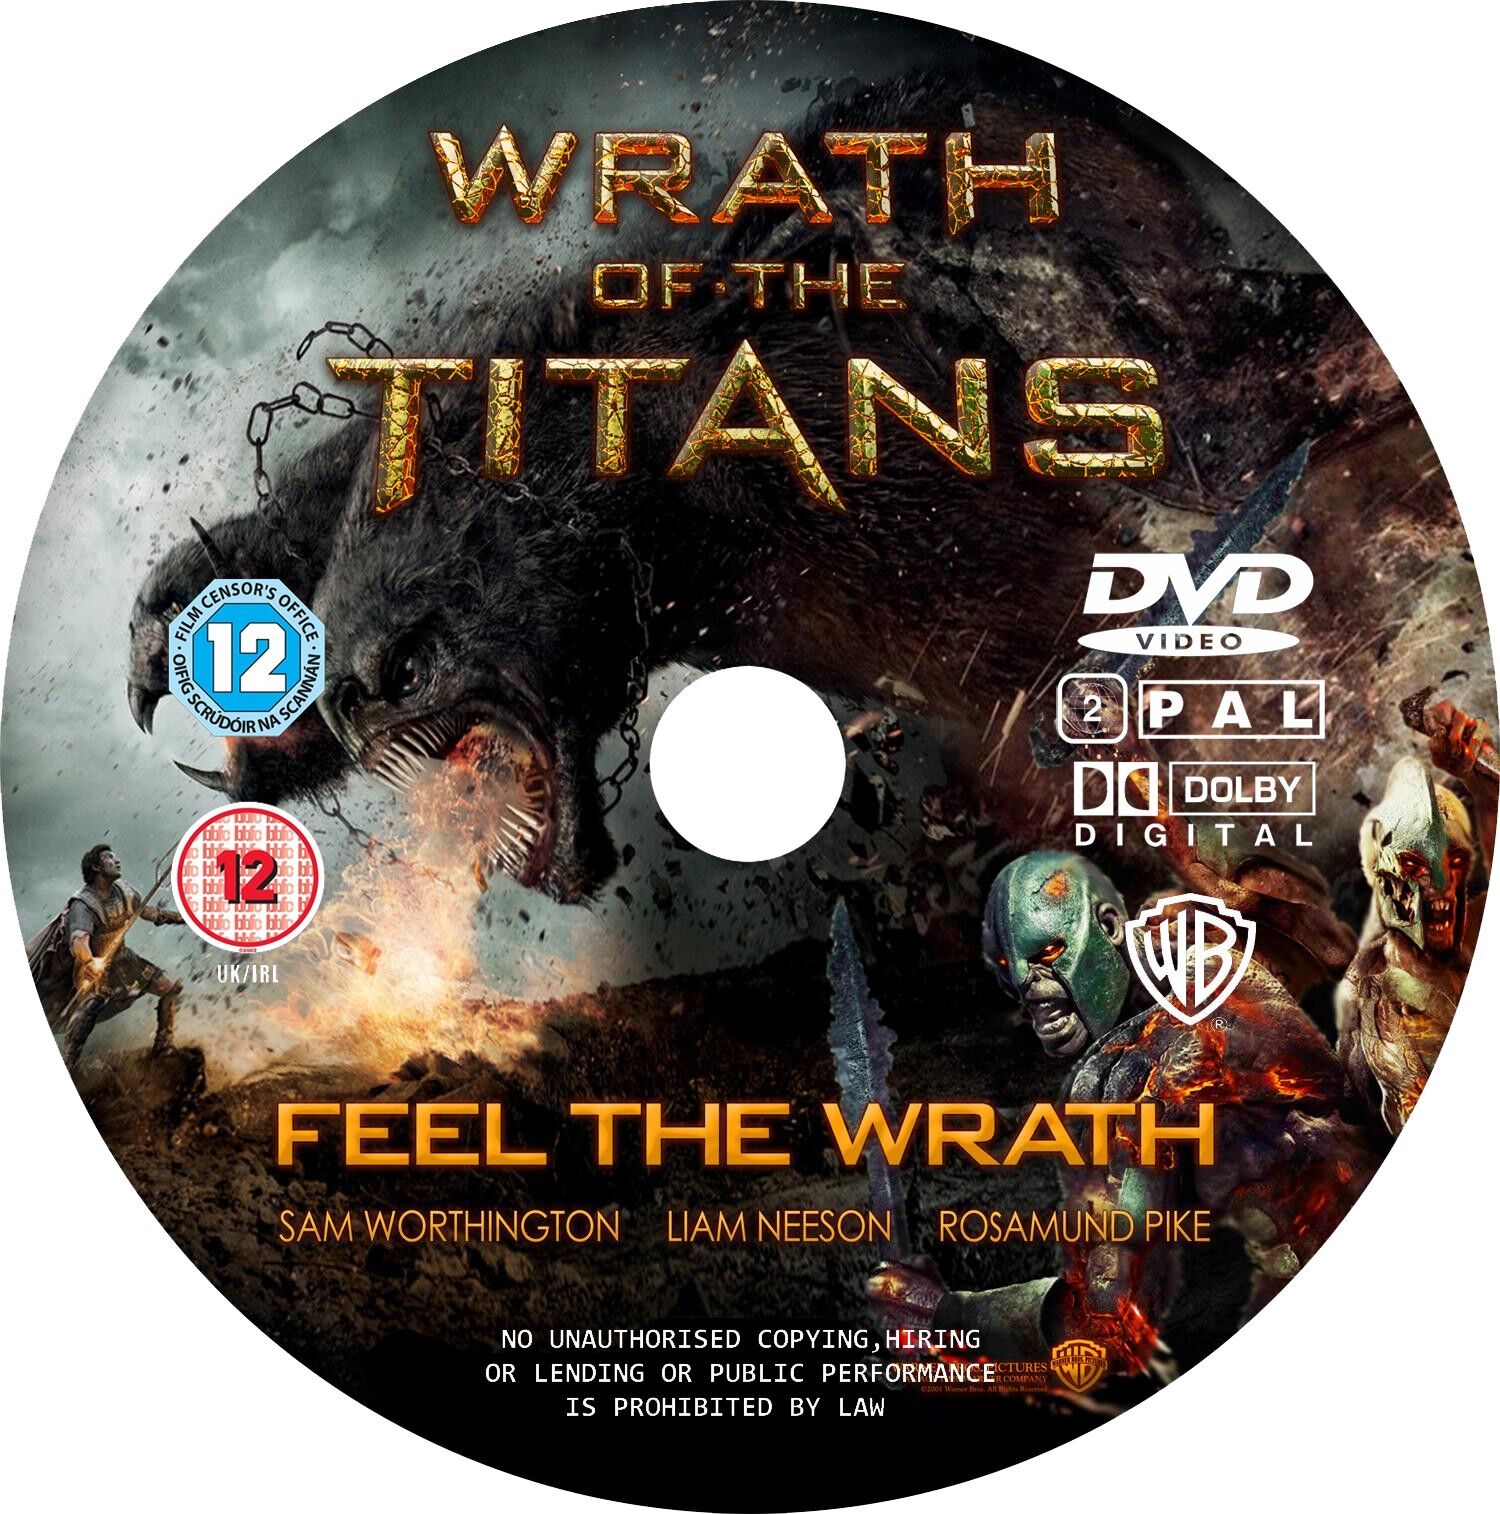 Lot Of 2 DVDs Movies: CLASH OF THE TITANS & WRATH OF THE TITANS